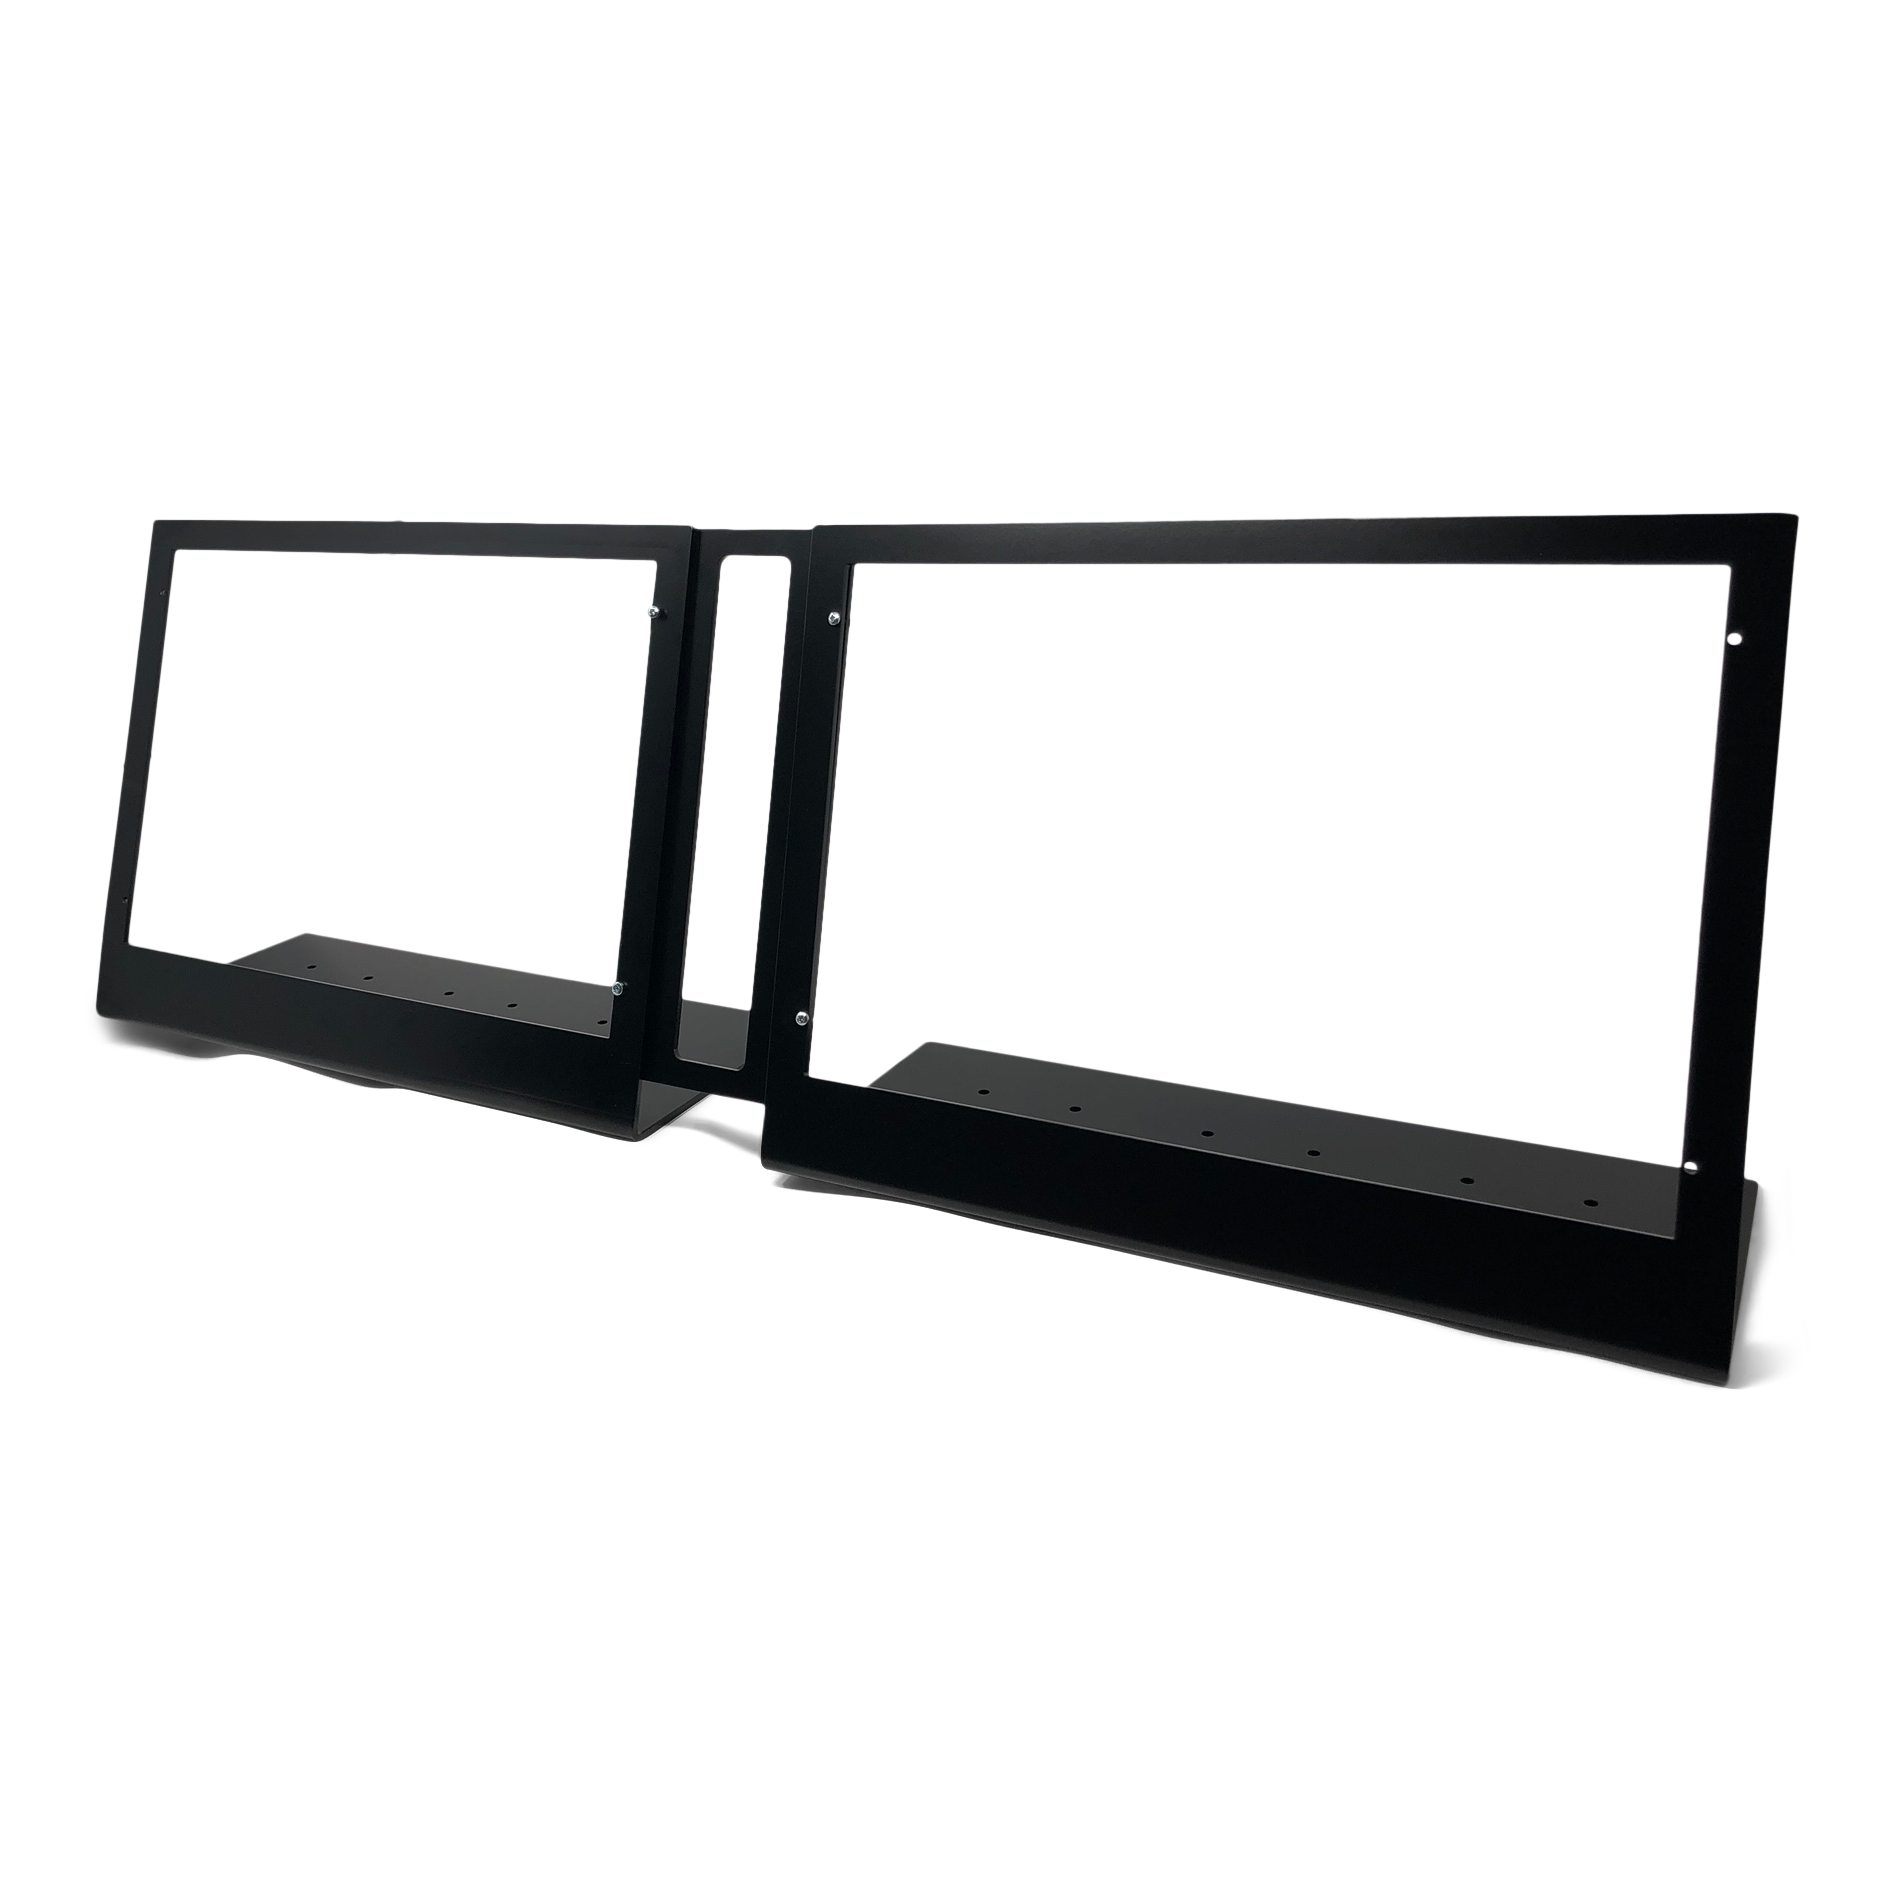 Desktop stand for RealSimGear G1000 Suite